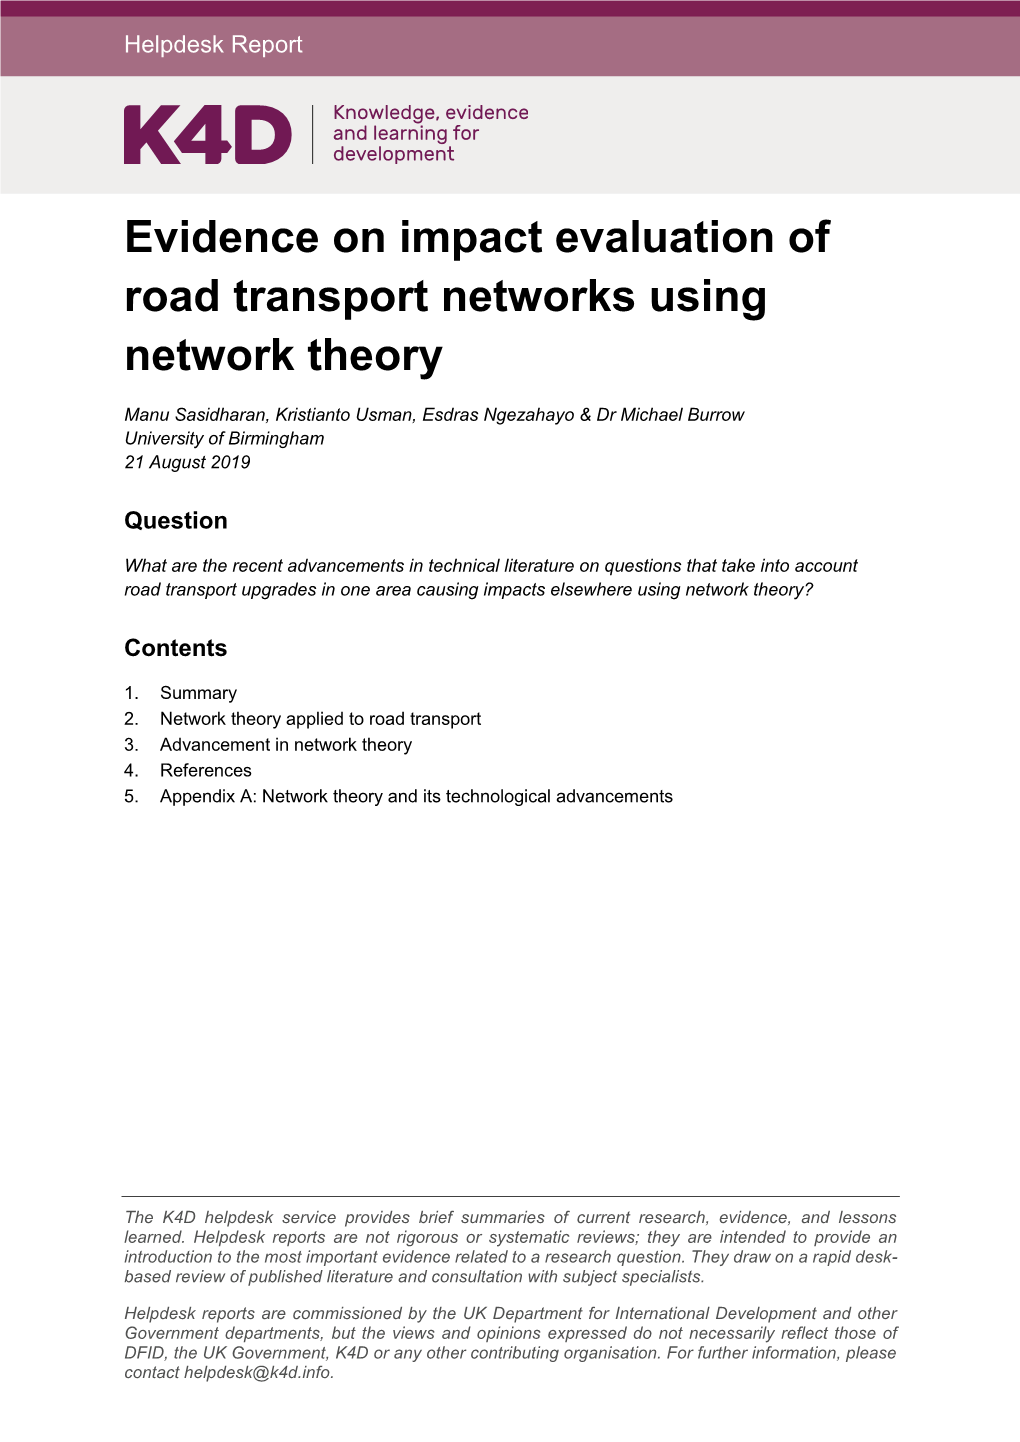 Evidence on Impact Evaluation of Road Transport Networks Using Network Theory